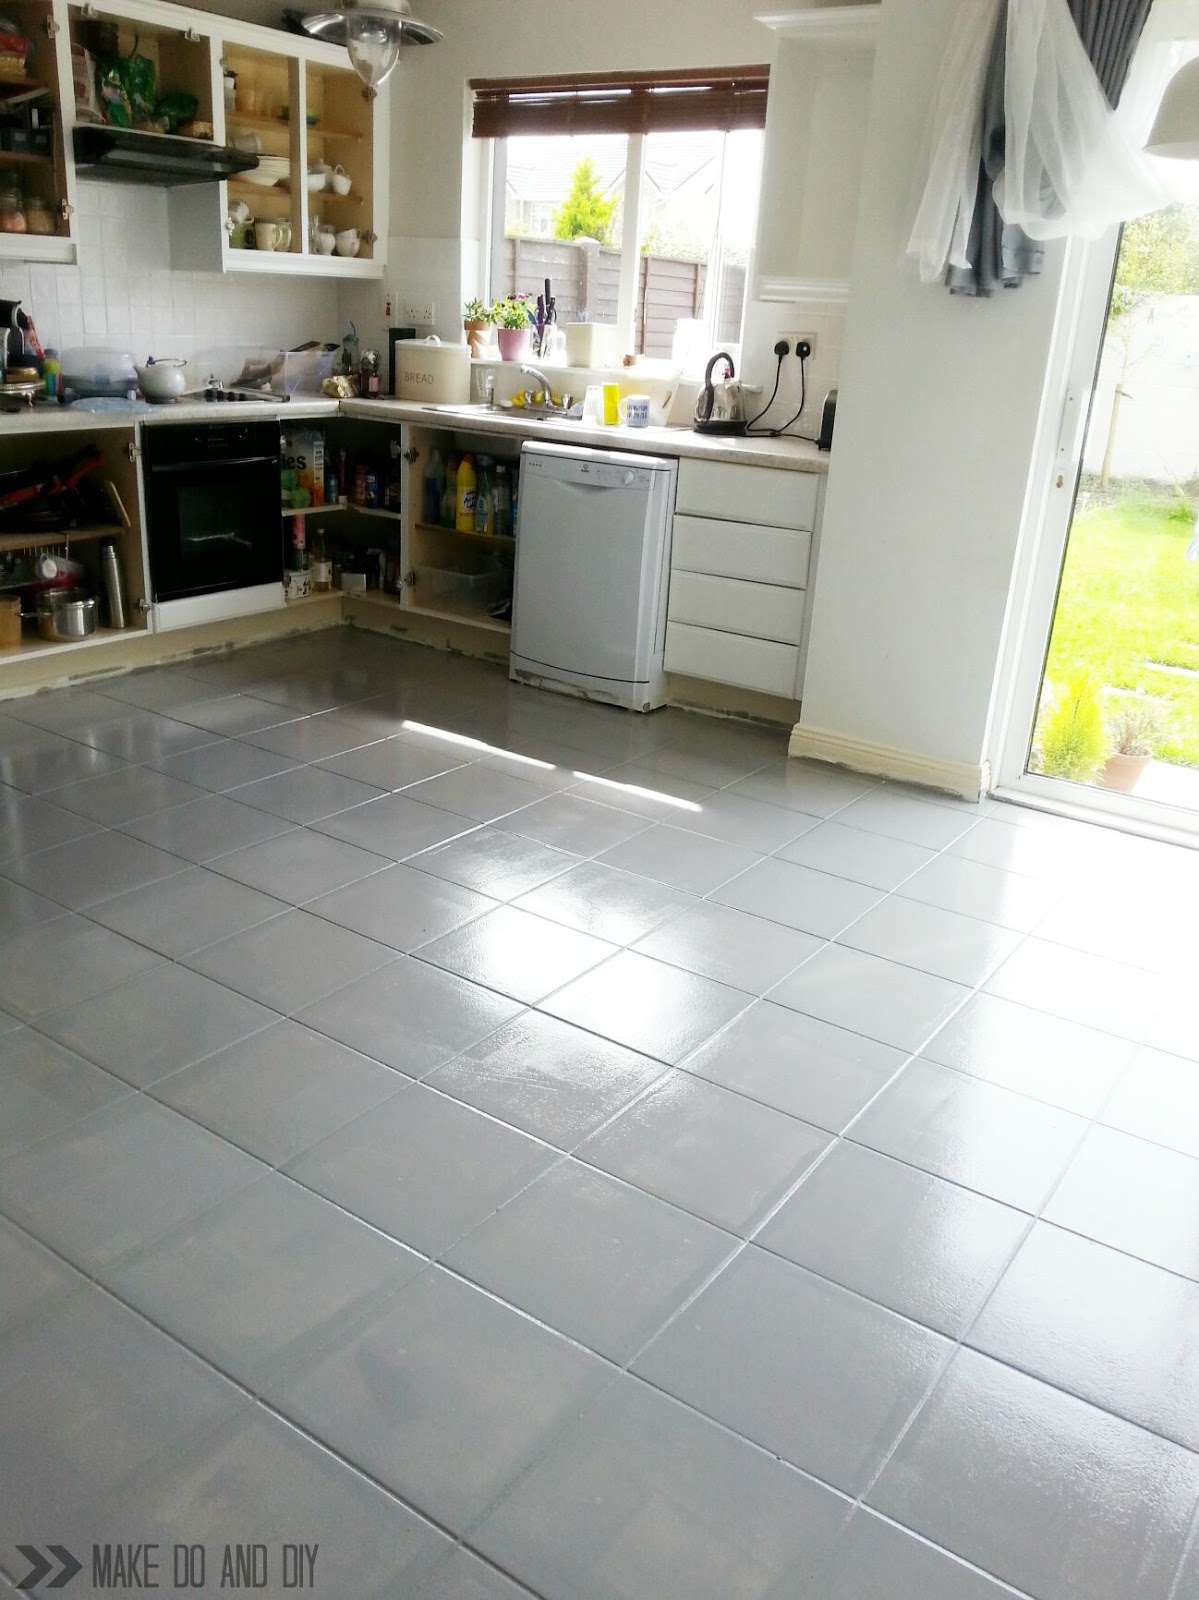 Painted Tile Floor No Really Make Do And DIY